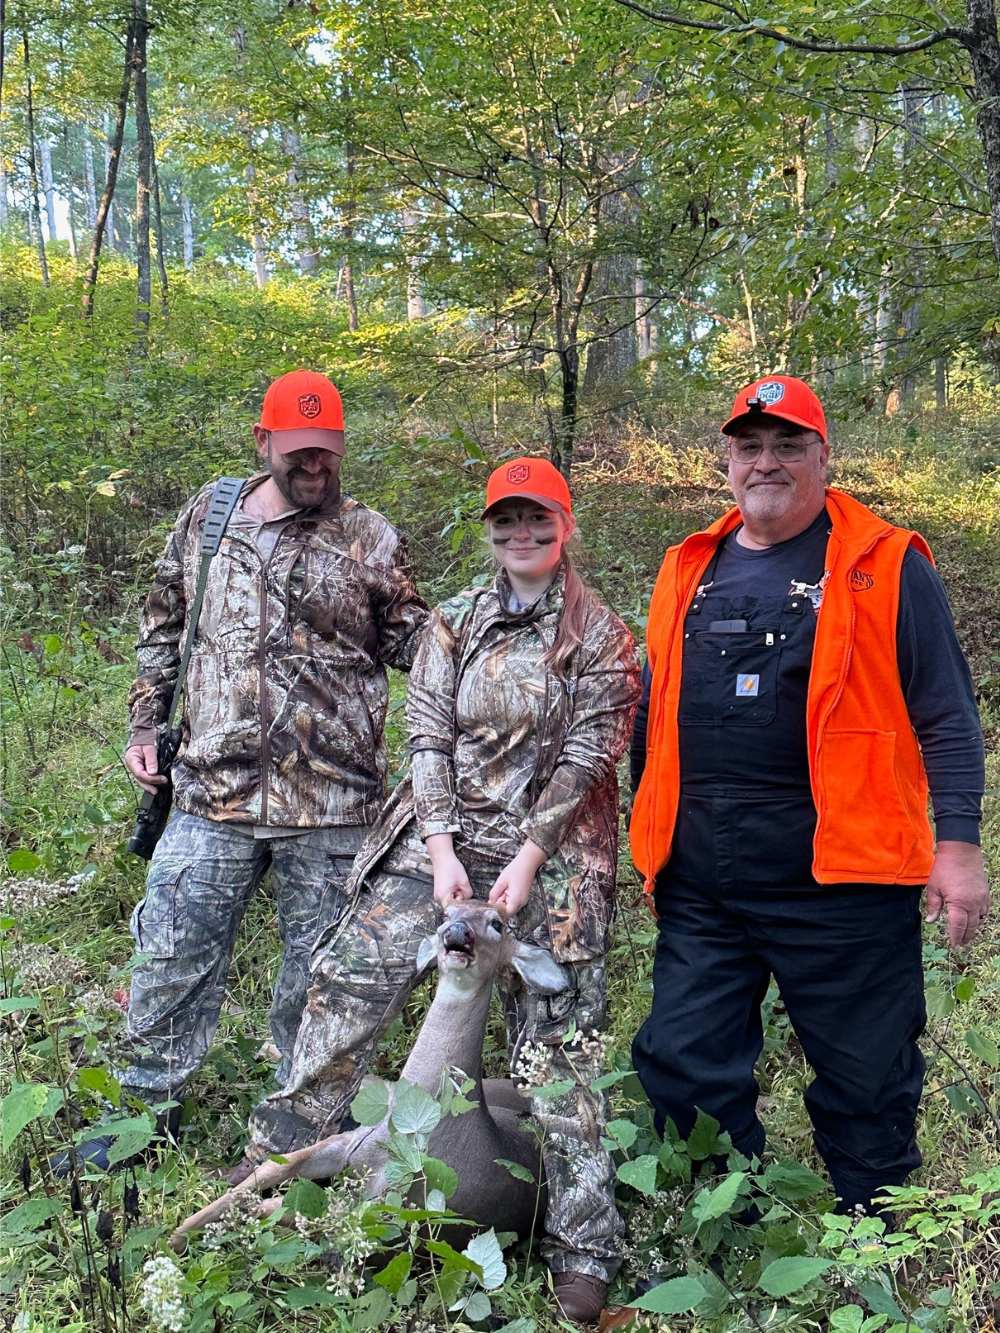 A photo of a woman holding the head of a harvested deer along with two men beside her. They're in the woods and all dressed in camuflage and blaze orange.